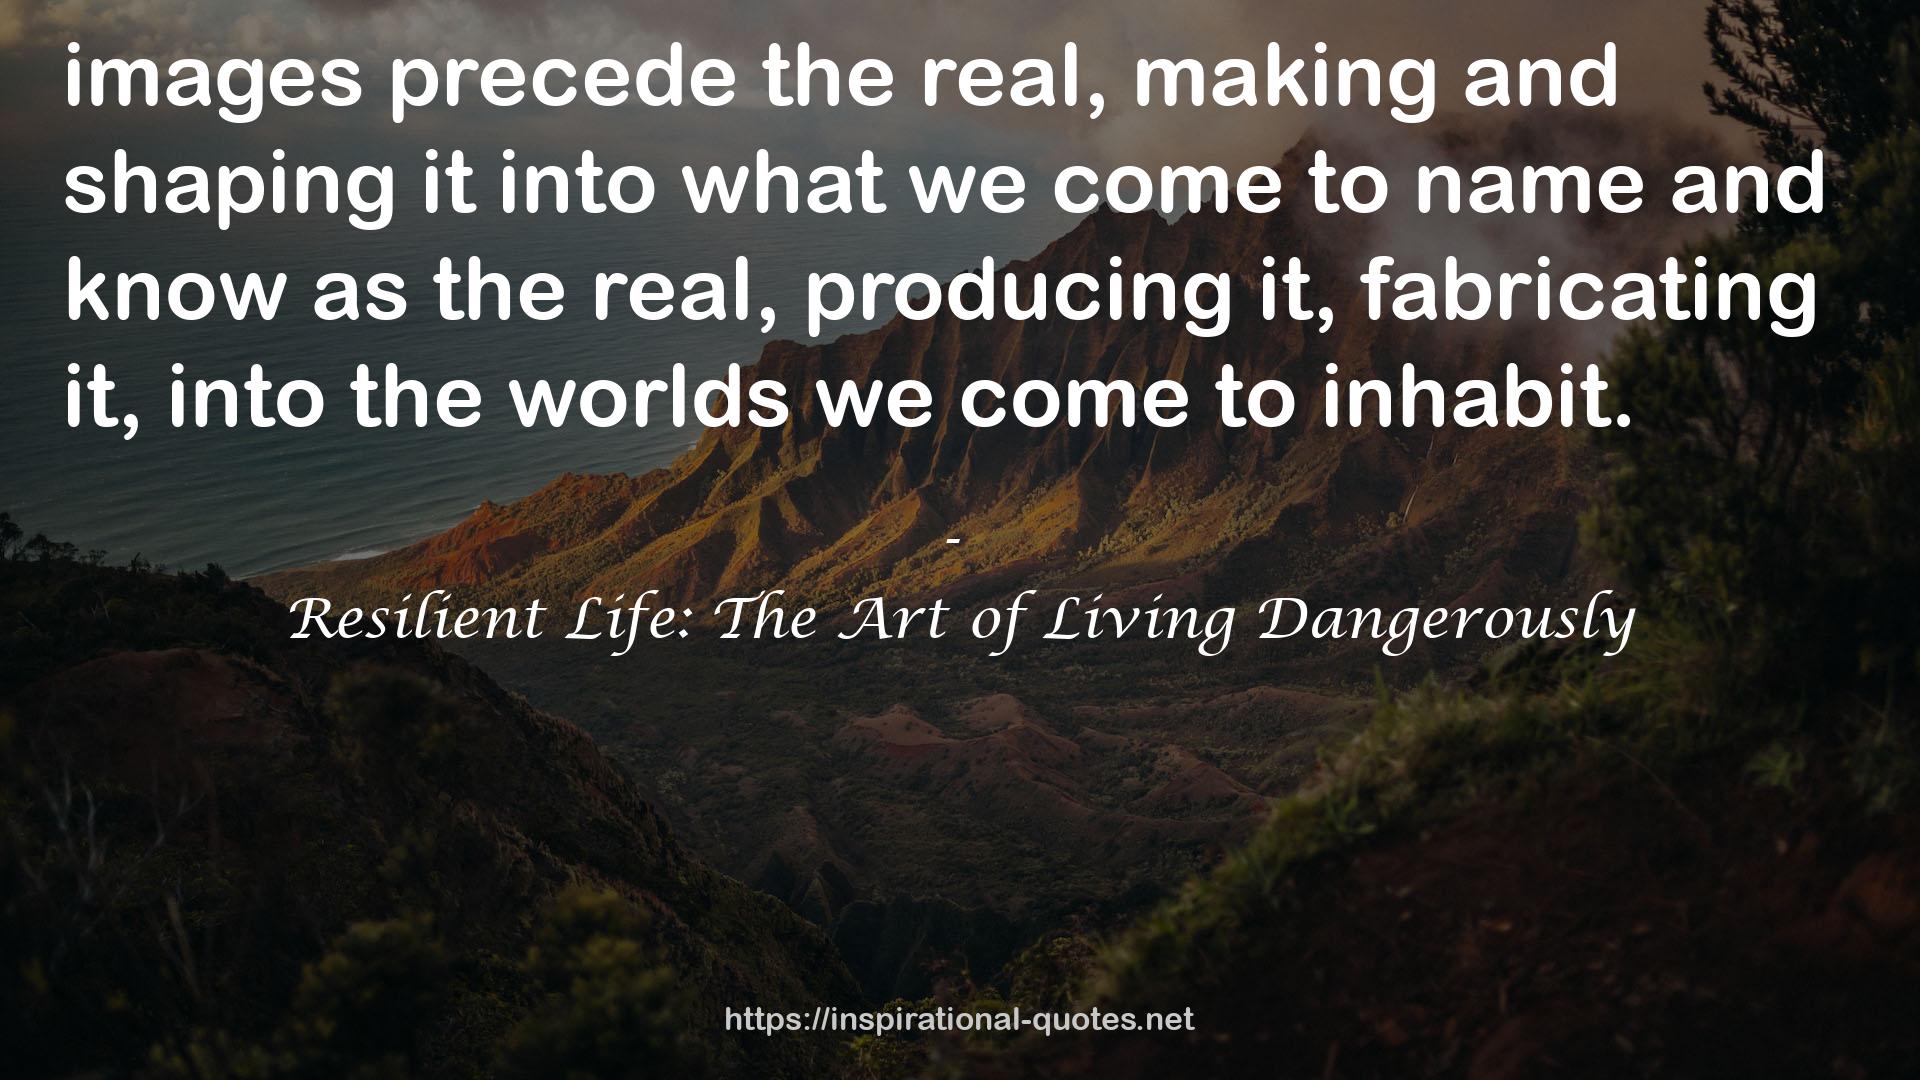 Resilient Life: The Art of Living Dangerously QUOTES